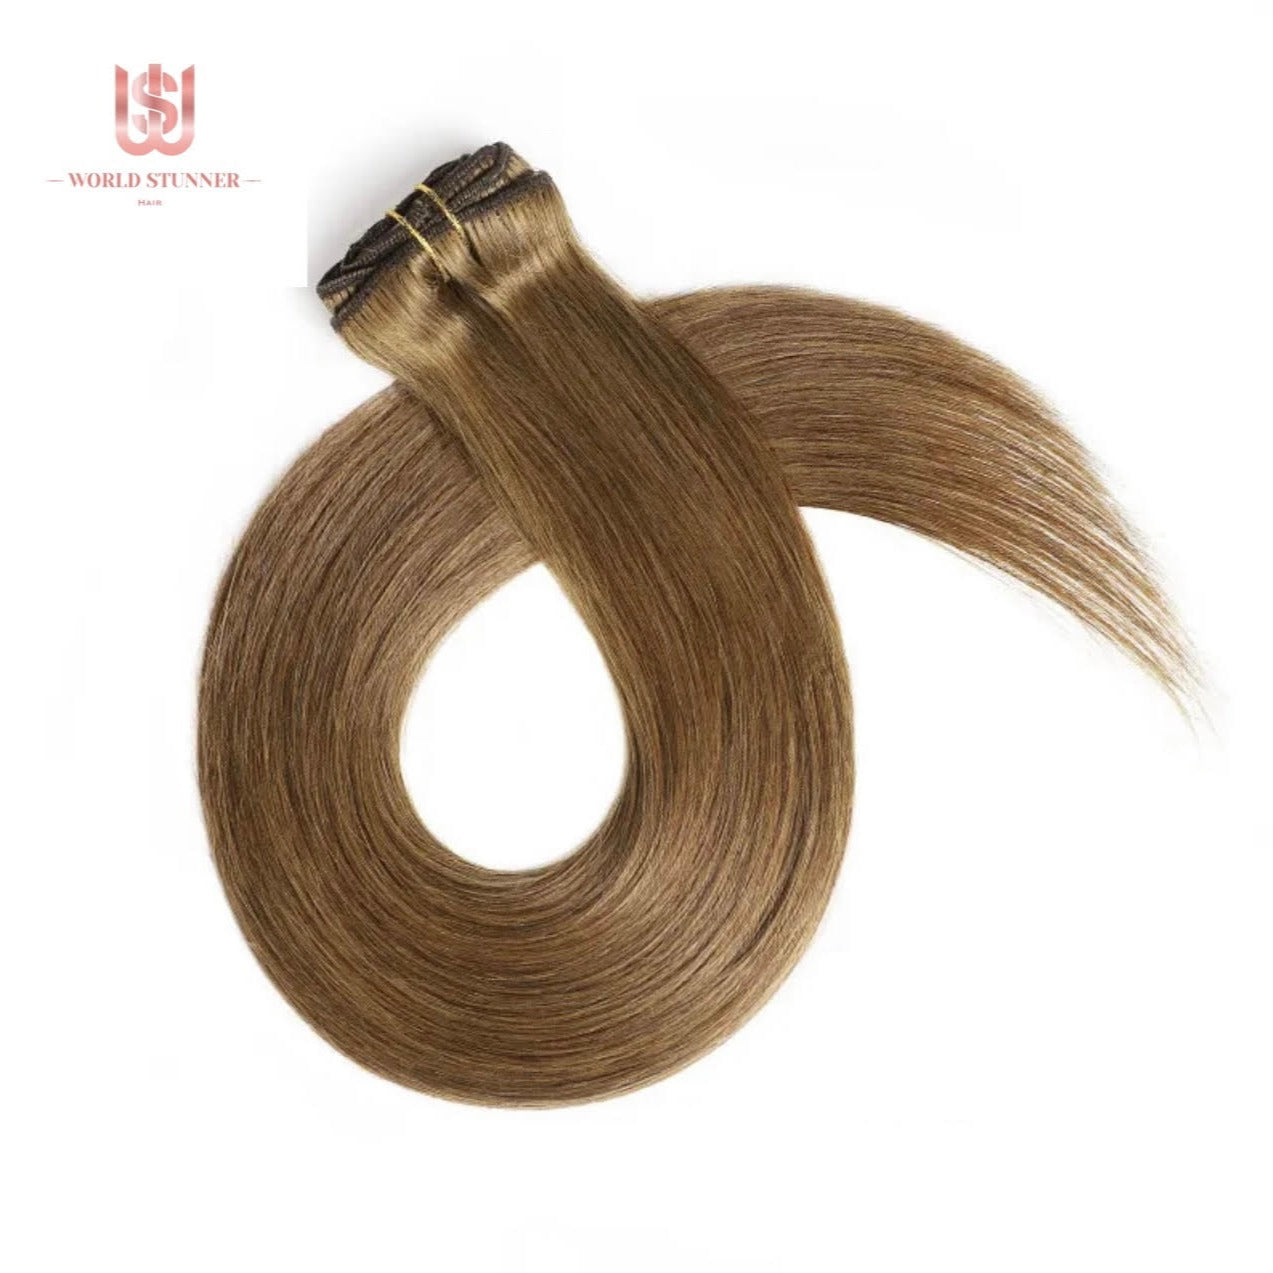 LIGHT BROWN - SUPER THICK 22” 7 PIECE STRAIGHT CLIPS IN HAIR EXTENSIONS